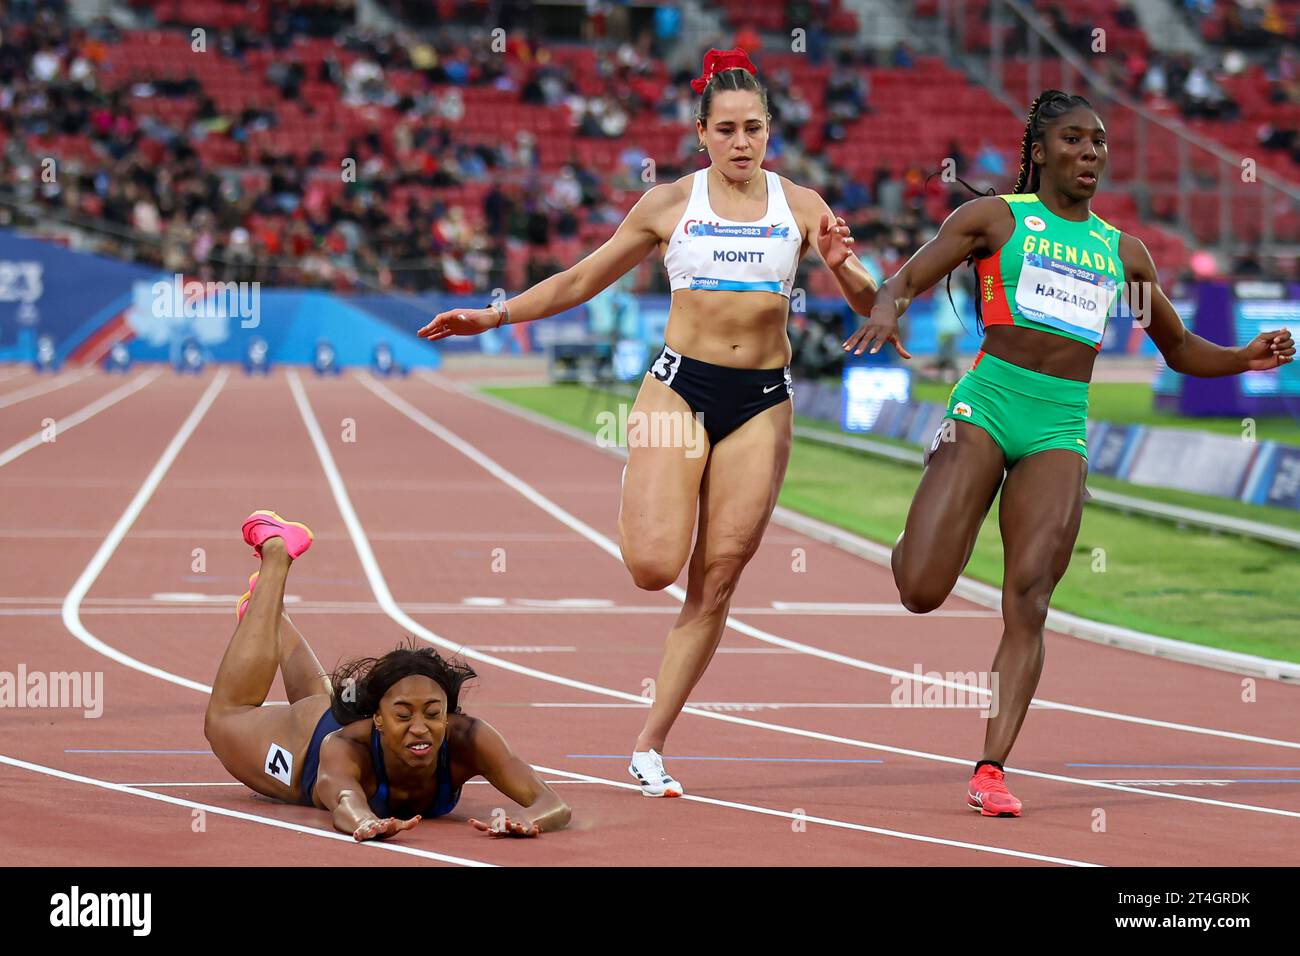 Laura Patricia Martinez of team Colombia falls alongside Maria Ignacia Montt of team Chile and Halle Michelle Hazzard of team Granada during heat 3 of the women's 100m semi-final at the Estadio Nacional de Chile on day 10 of the Santiago 2023 Pan American Games in October 30, 2023 in Santiago, Chile. ((134) Rodolfo Buhrer / La Imagem /  SPP) (Foto: Sports Press Photo/Sports Press Photo/C - ONE HOUR DEADLINE - ONLY ACTIVATE FTP IF IMAGES LESS THAN ONE HOUR OLD - Alamy) Stock Photo